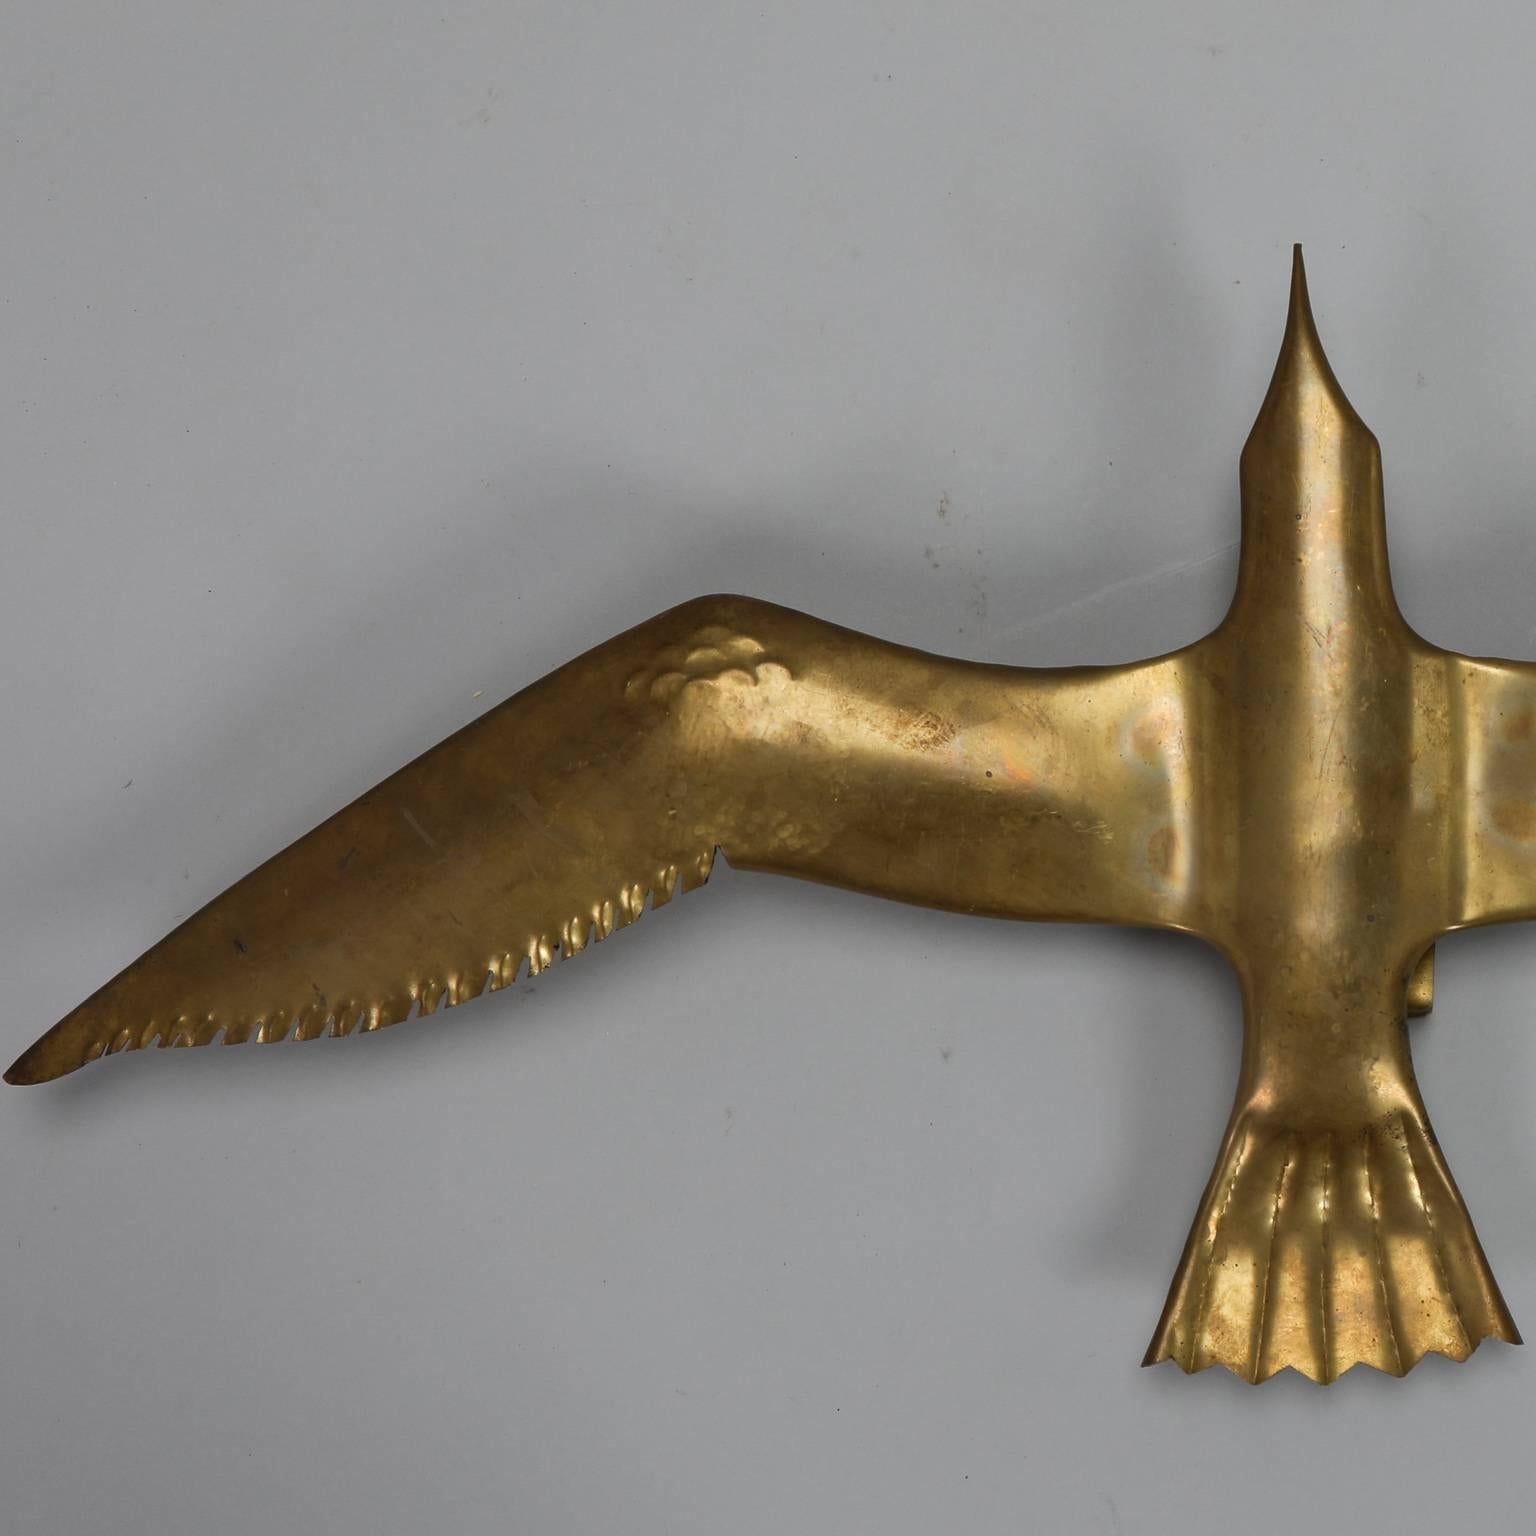 Found in Italy, this large polished brass seagull has a light socket that can be electrified for use as a sconce or leave it unwired and use as a wall-mounted sculpture. Three in this finish and size range available at the time of posting. Please